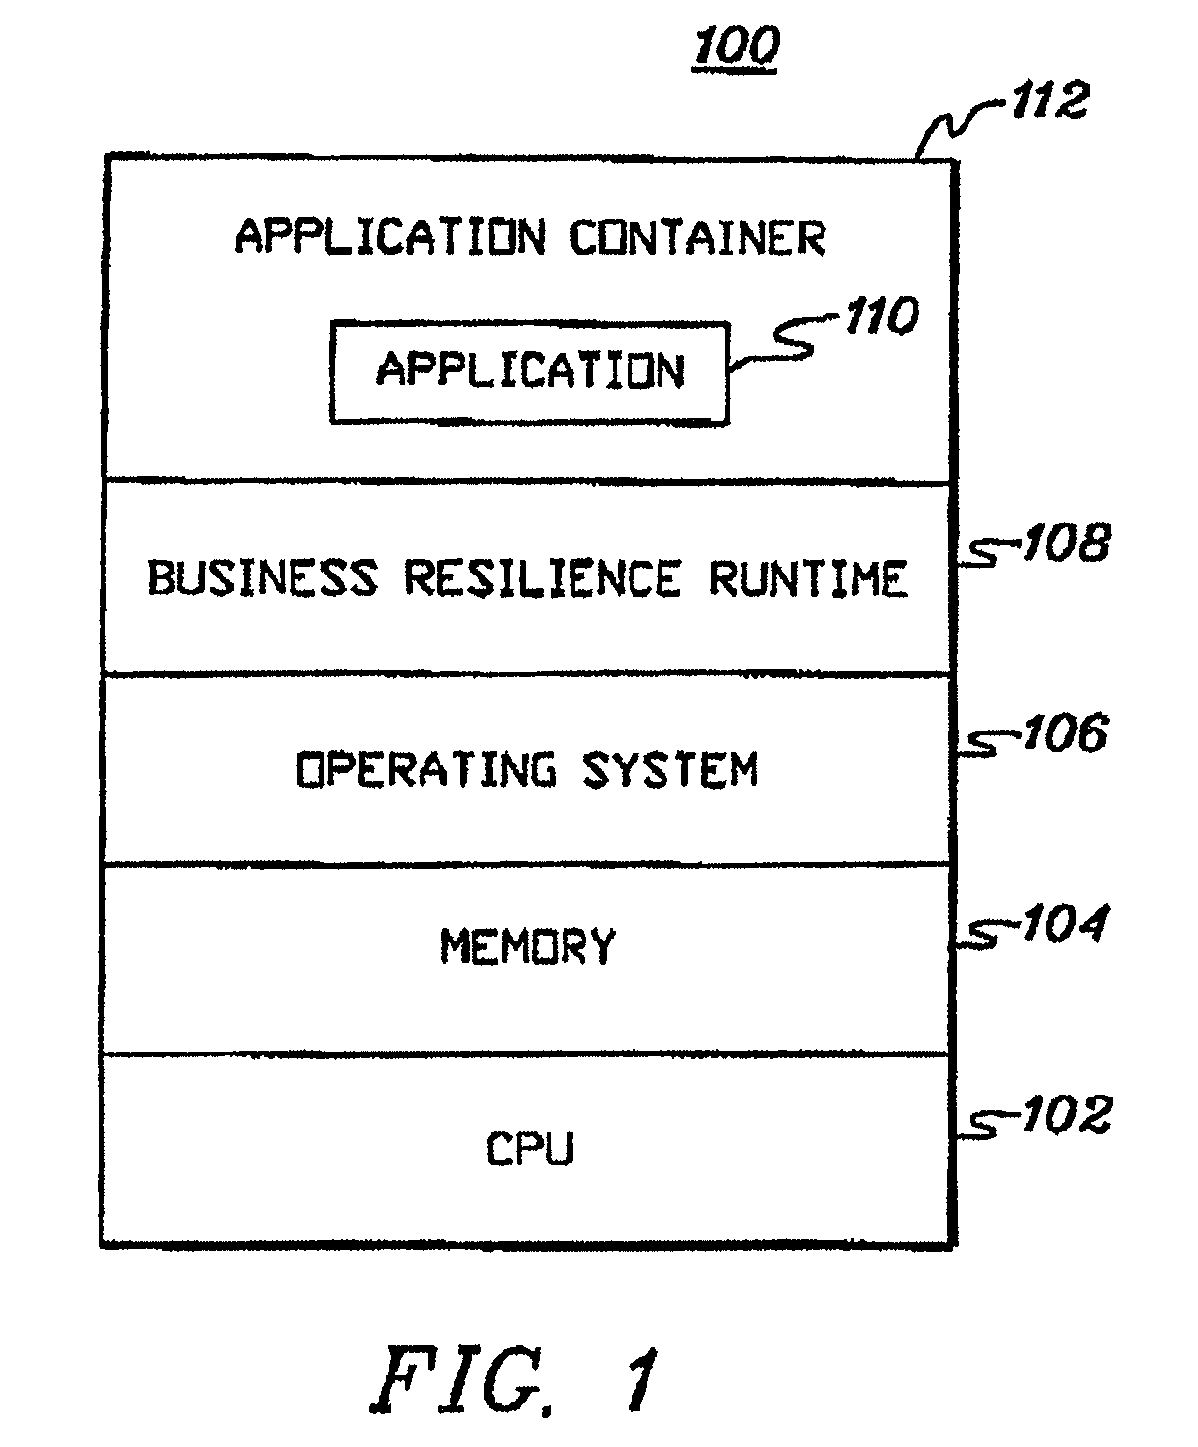 Defining a computer recovery process that matches the scope of outage including determining a root cause and performing escalated recovery operations